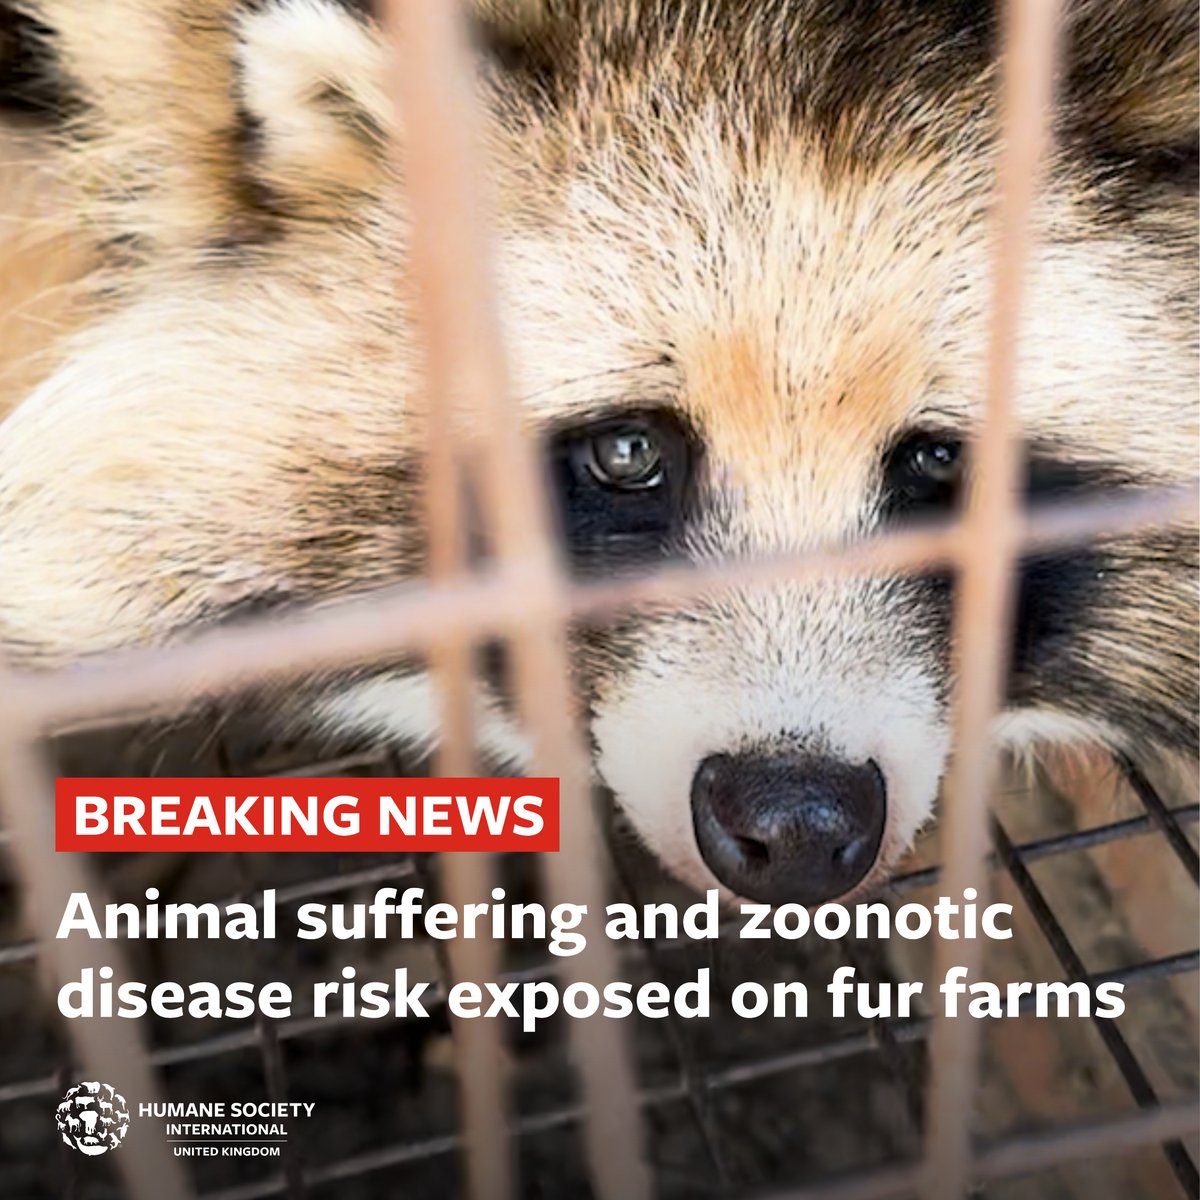 ACT NOW: Alarming footage from fur farms in China shows animals suffering mentally and kept in intensive conditions despite the potential for zoonotic disease spread 🚨 Take action for a #FurFreeBritain now: bit.ly/3xCmcK3